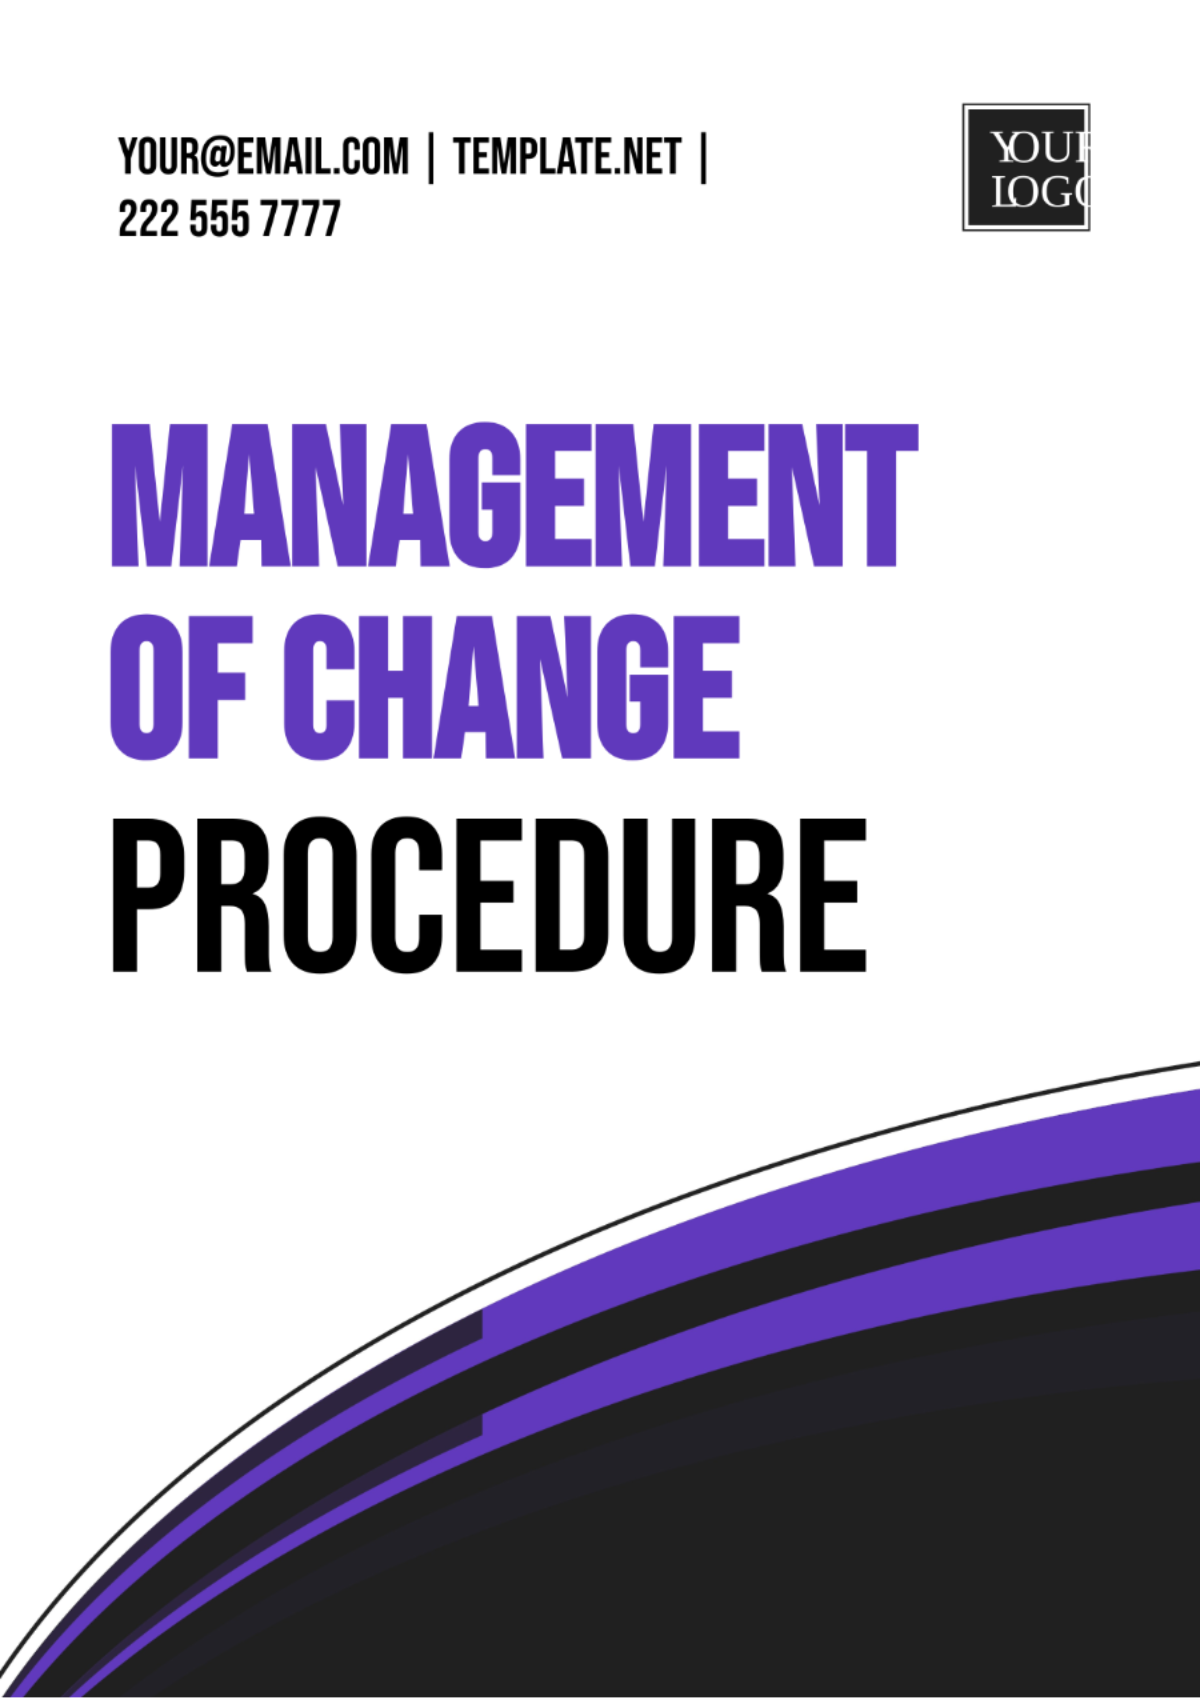 Free Management Of Change Procedure Template